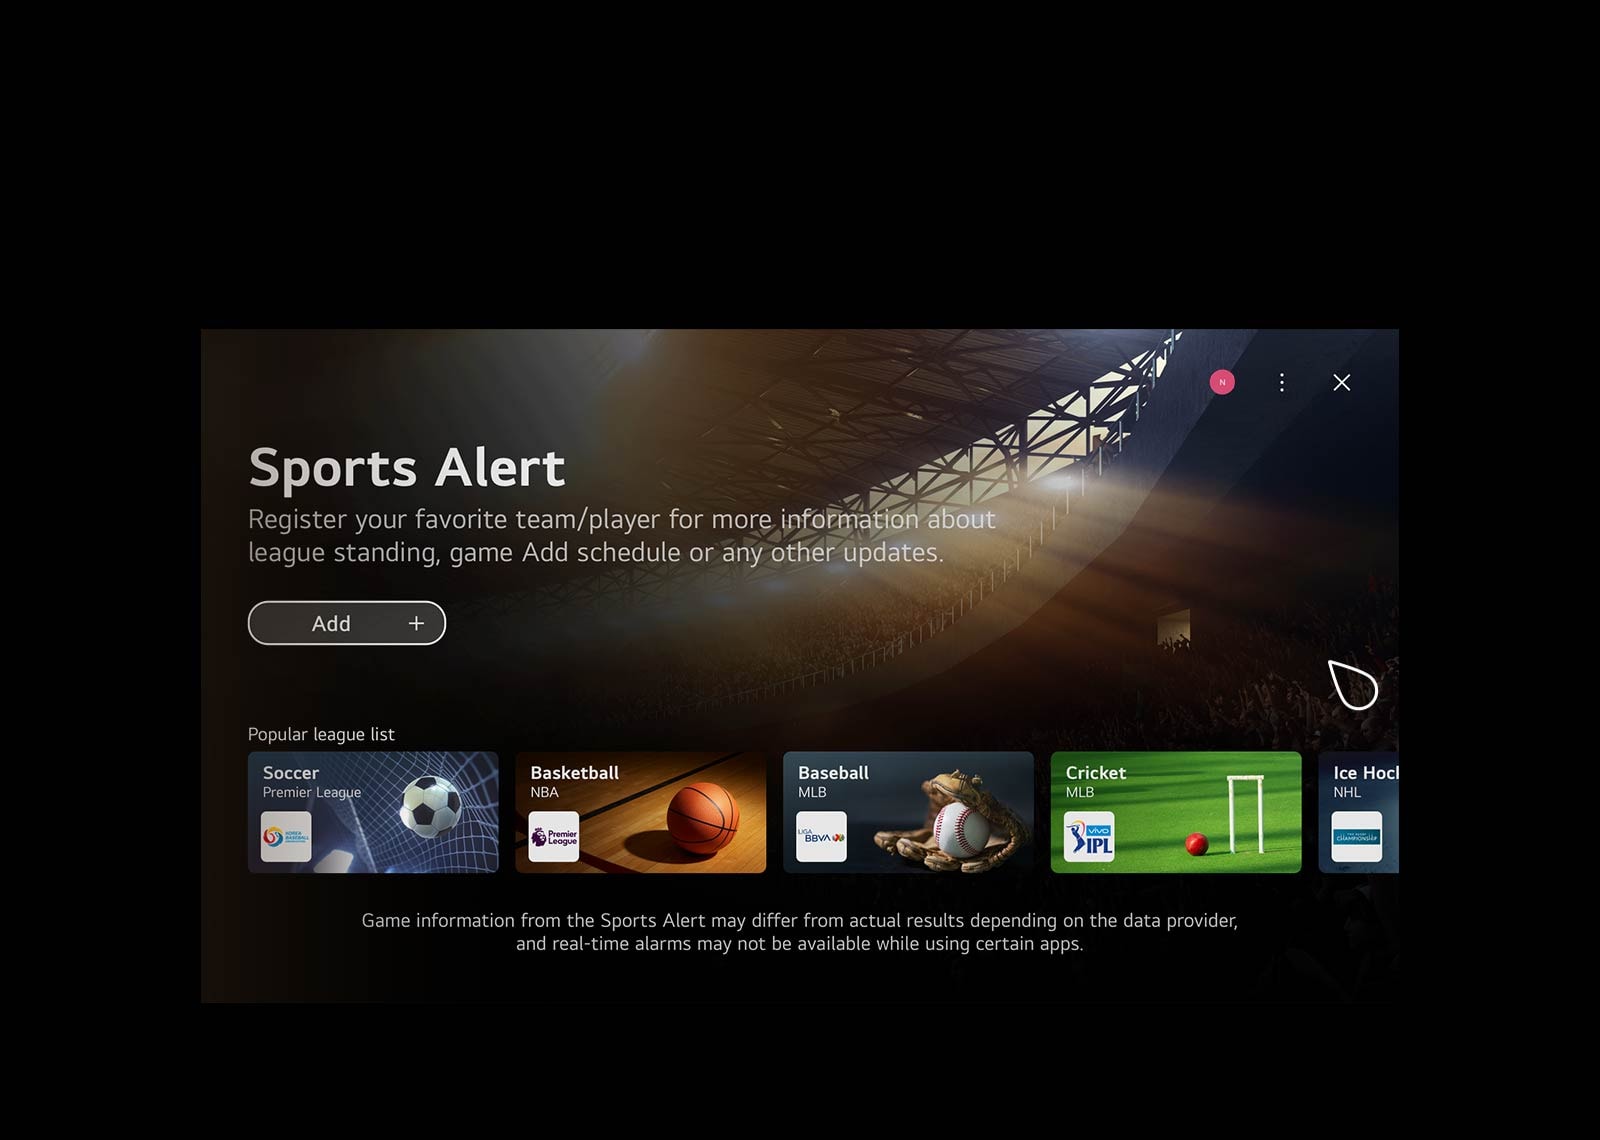 A video showing WebOS's home screen. The cursor clicks on the Game Quick Card and then the Sports Quick Card, both of which lead to screens with related content.